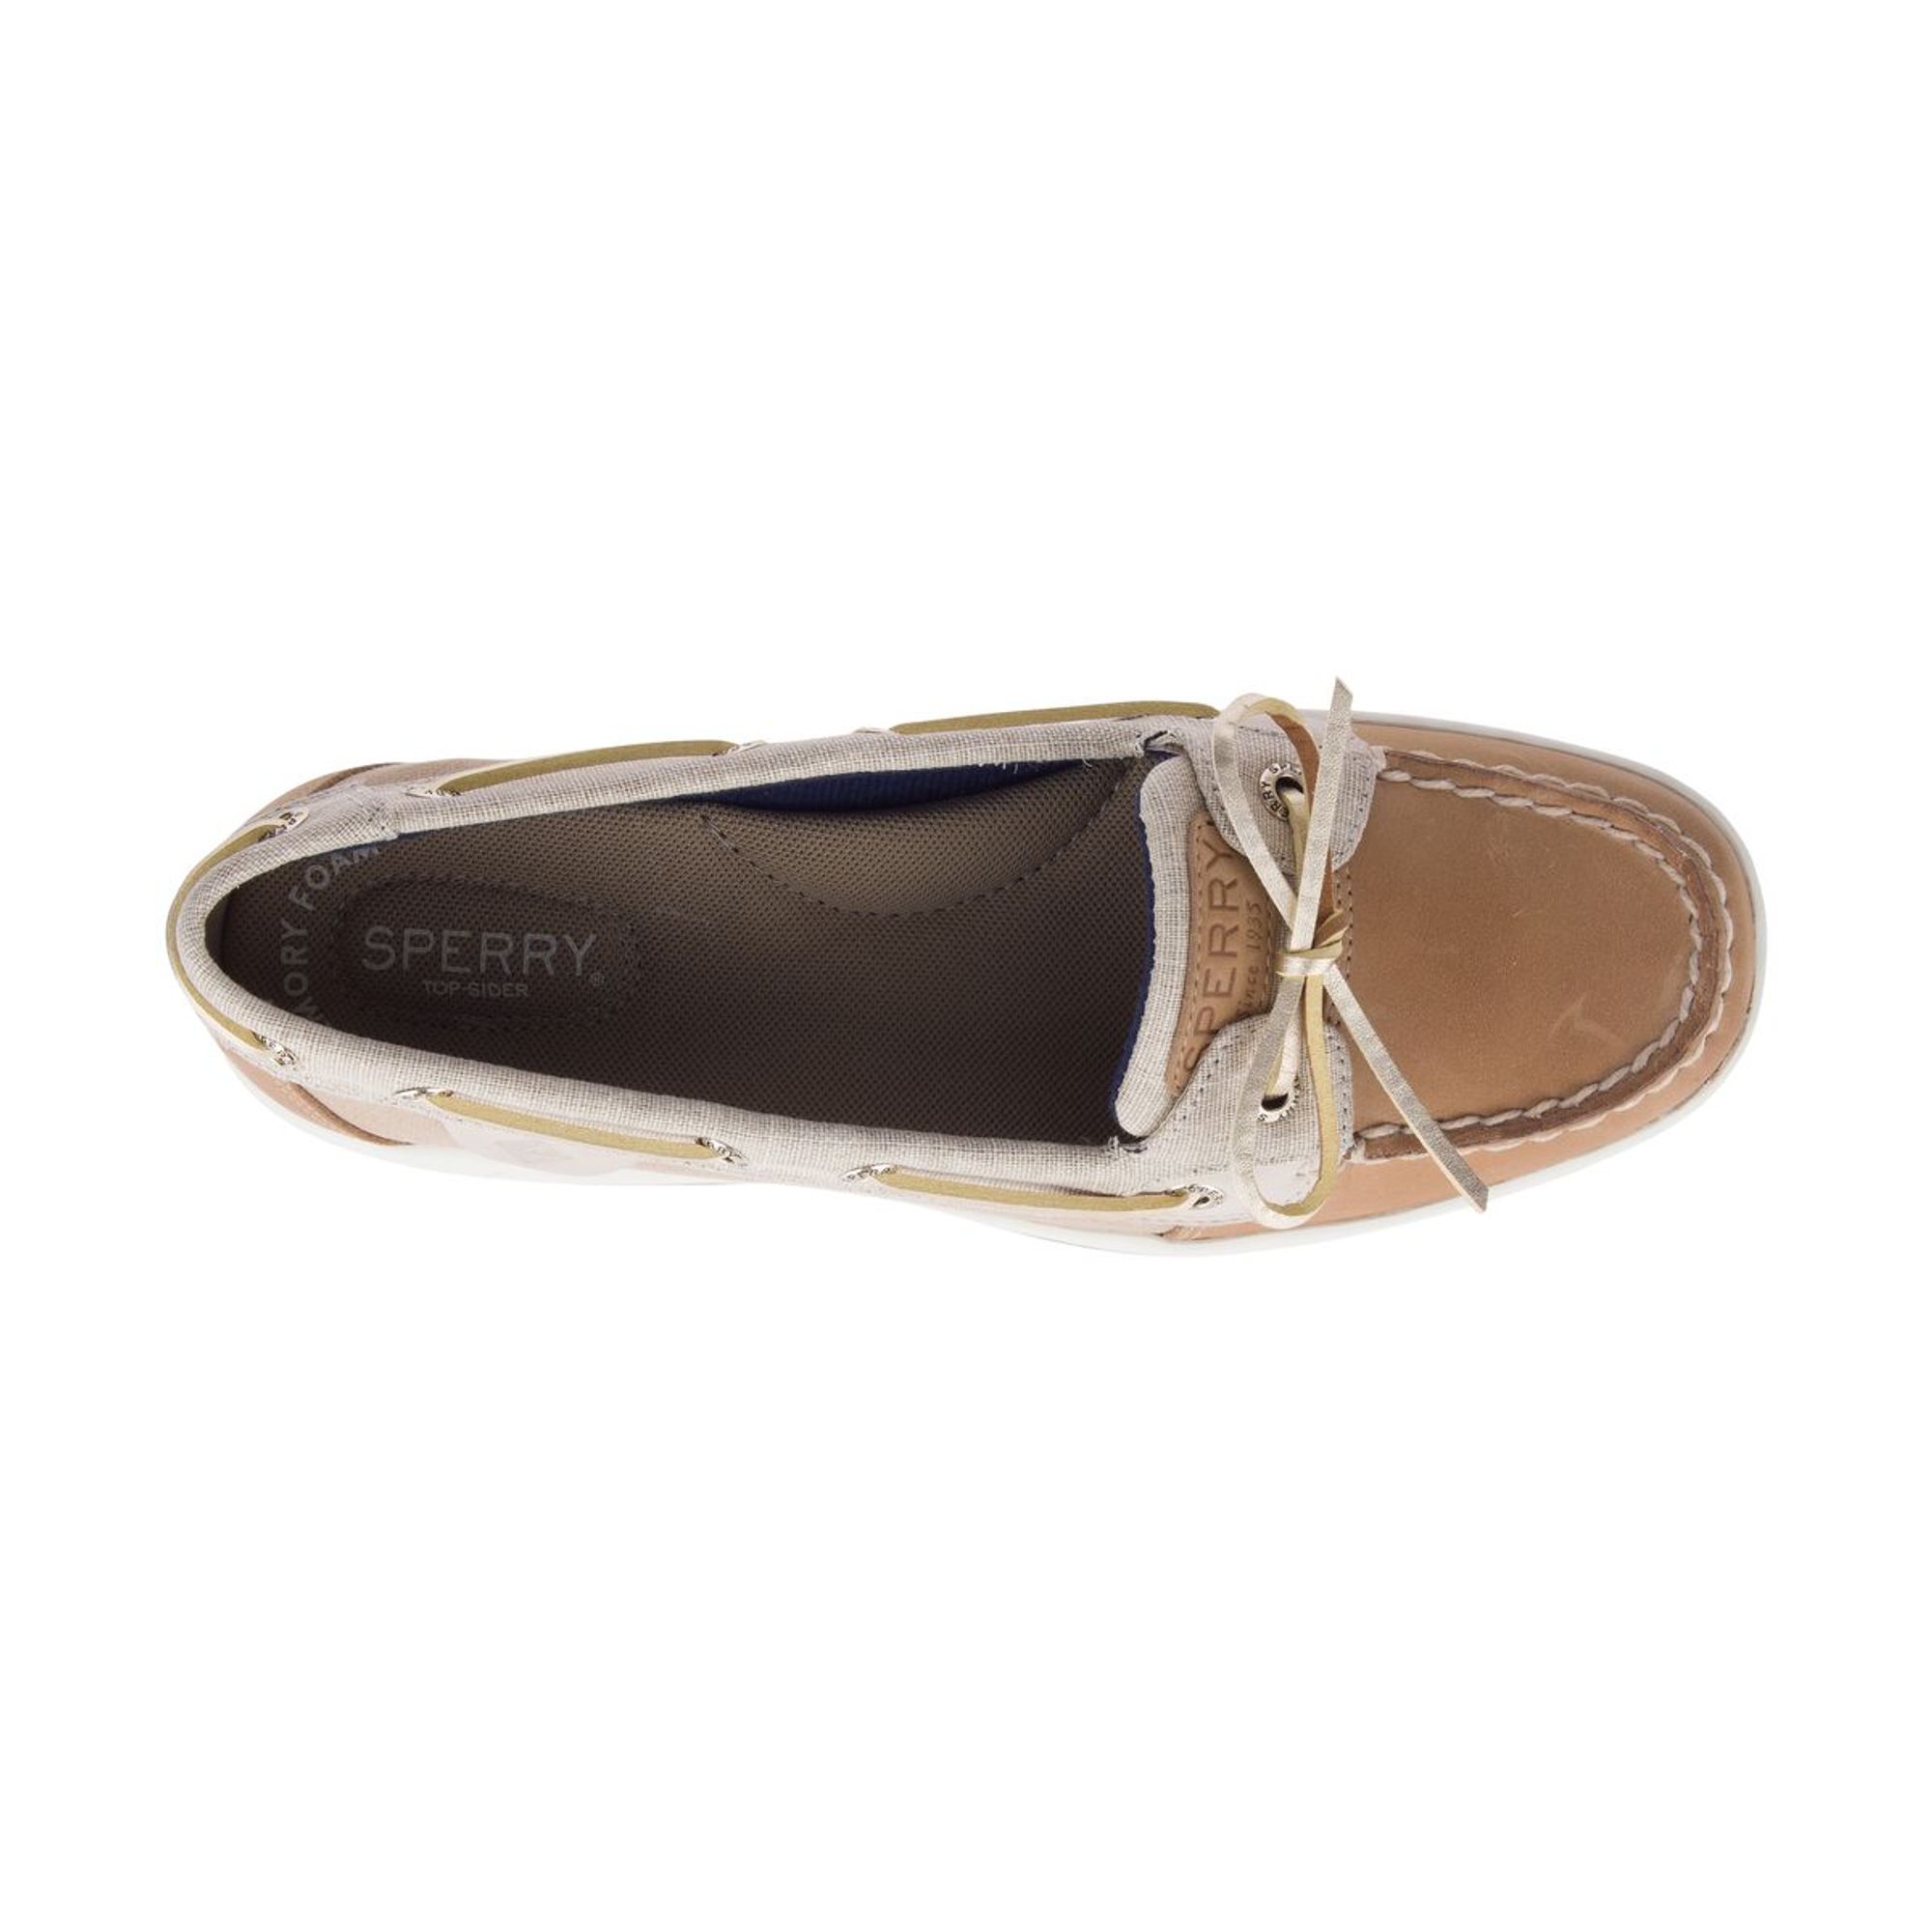 sperry shoes mujer